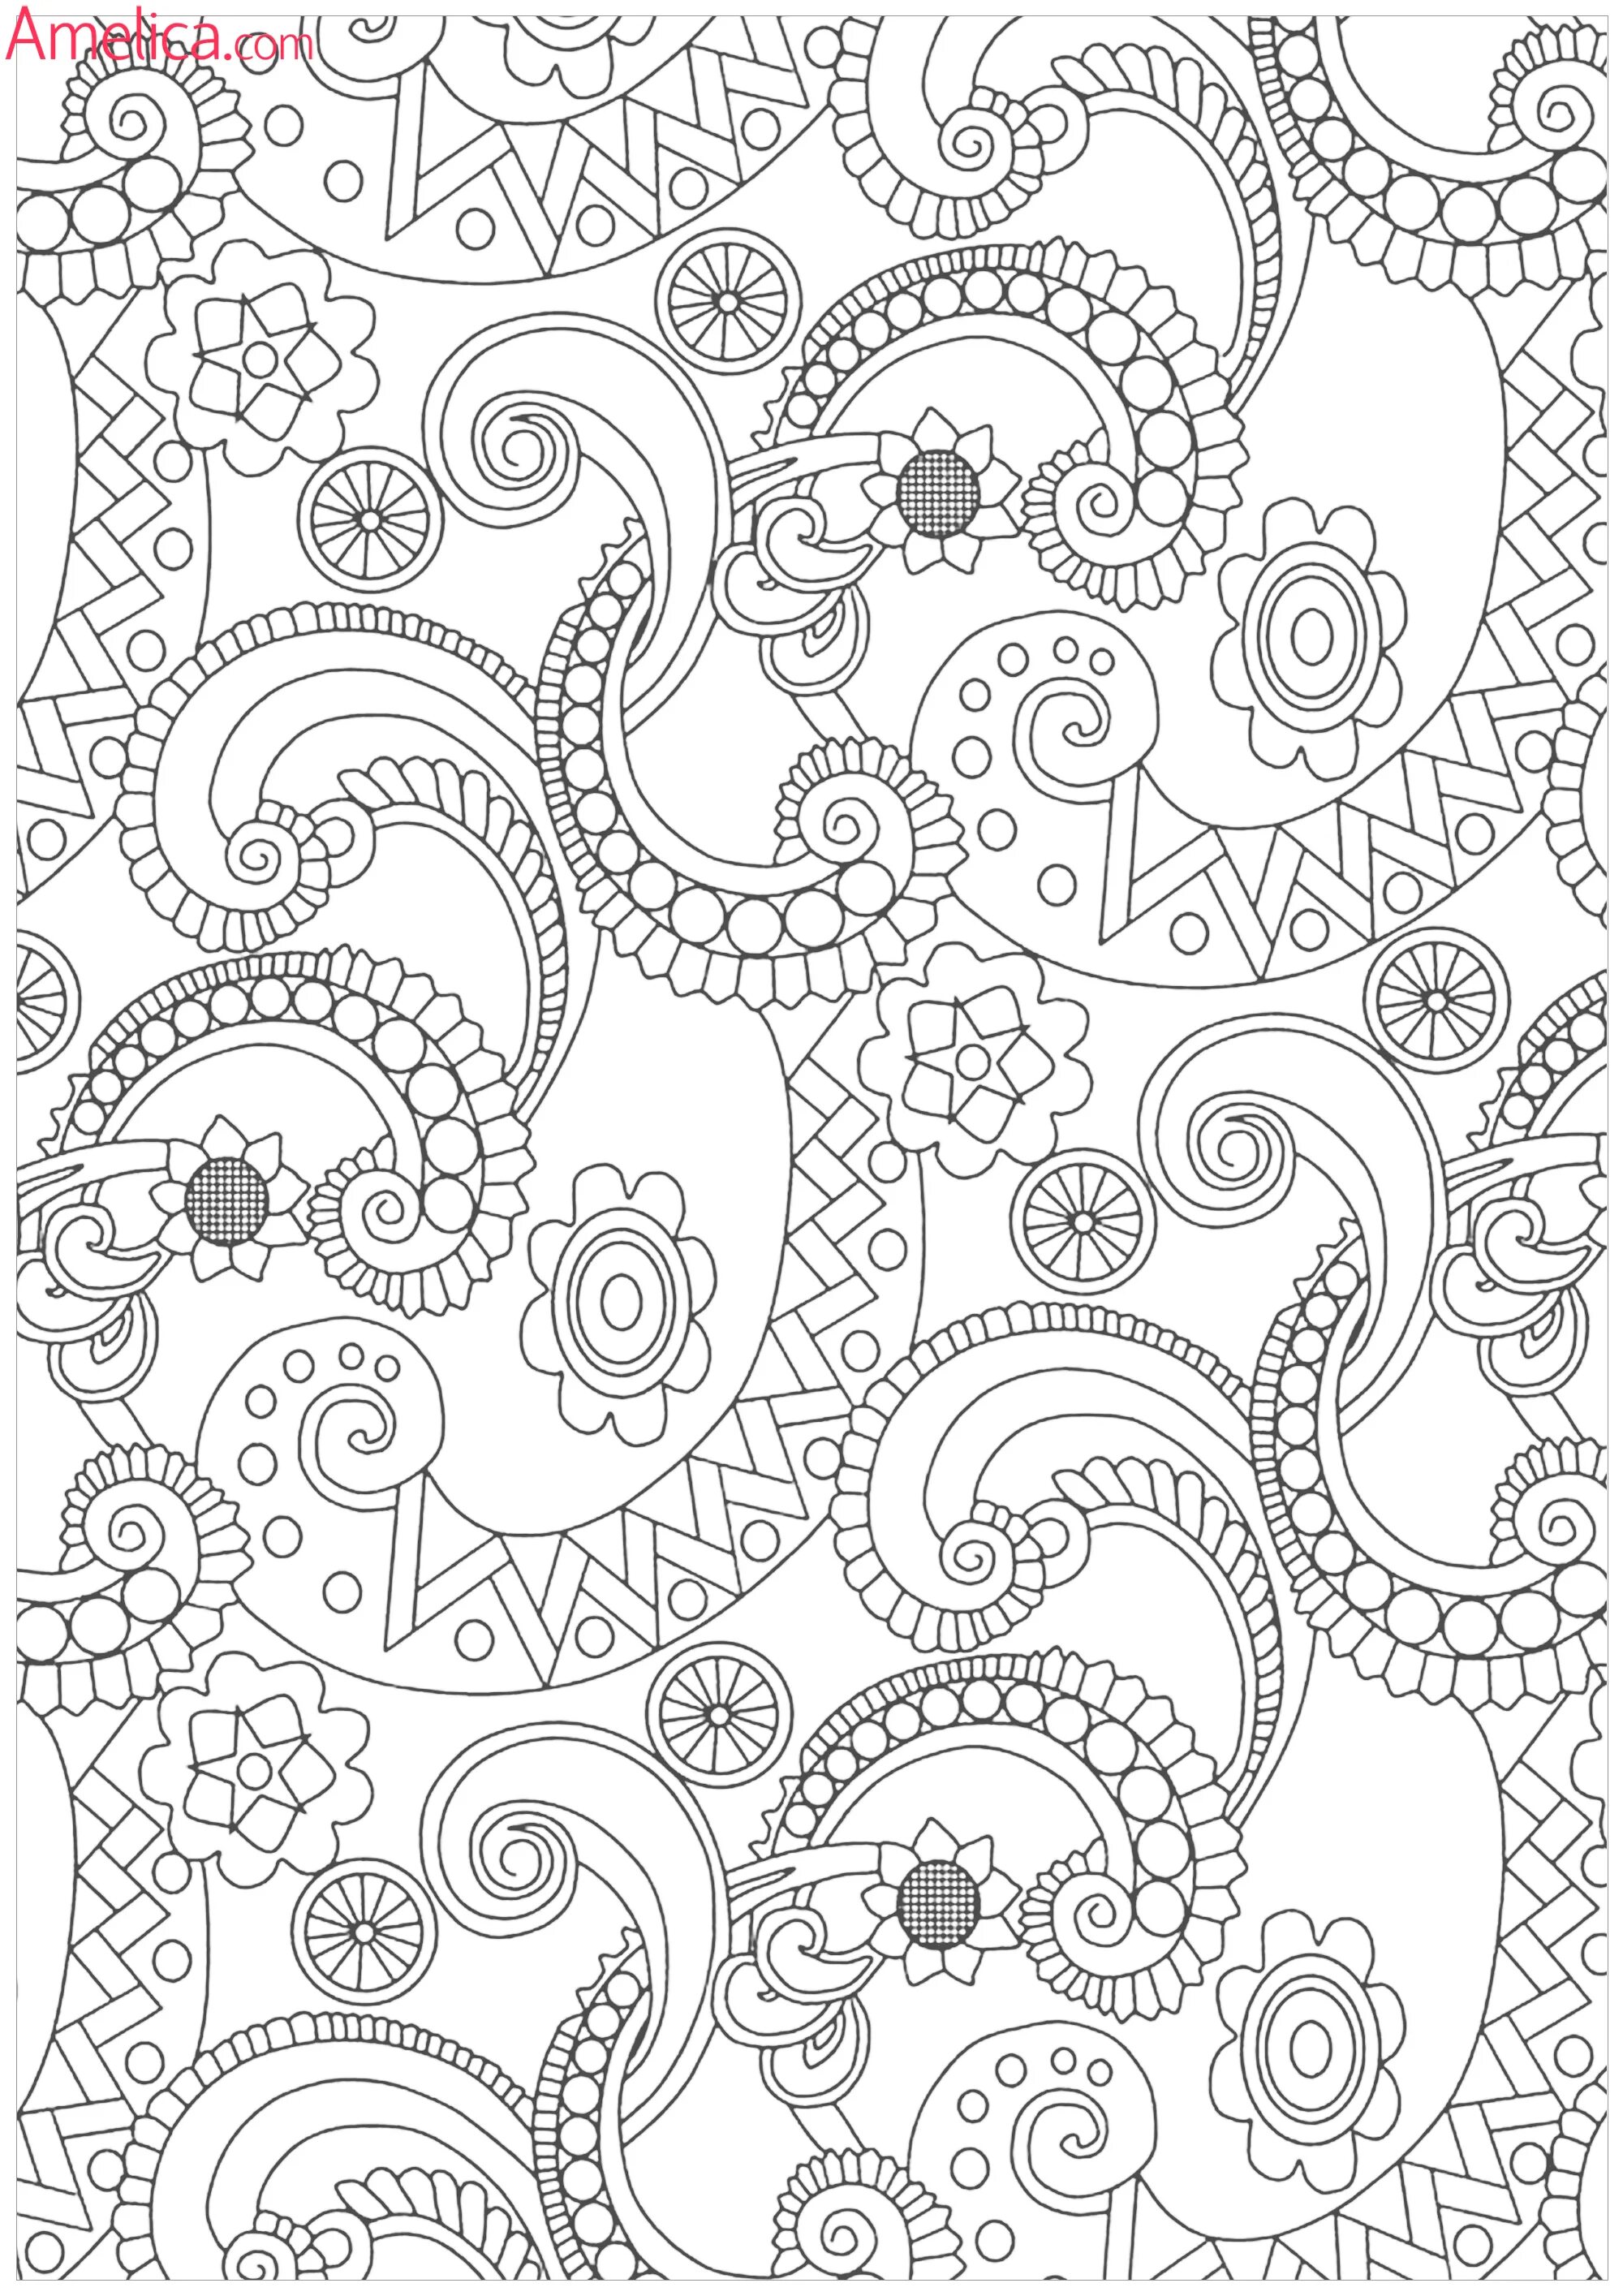 Patterned #3